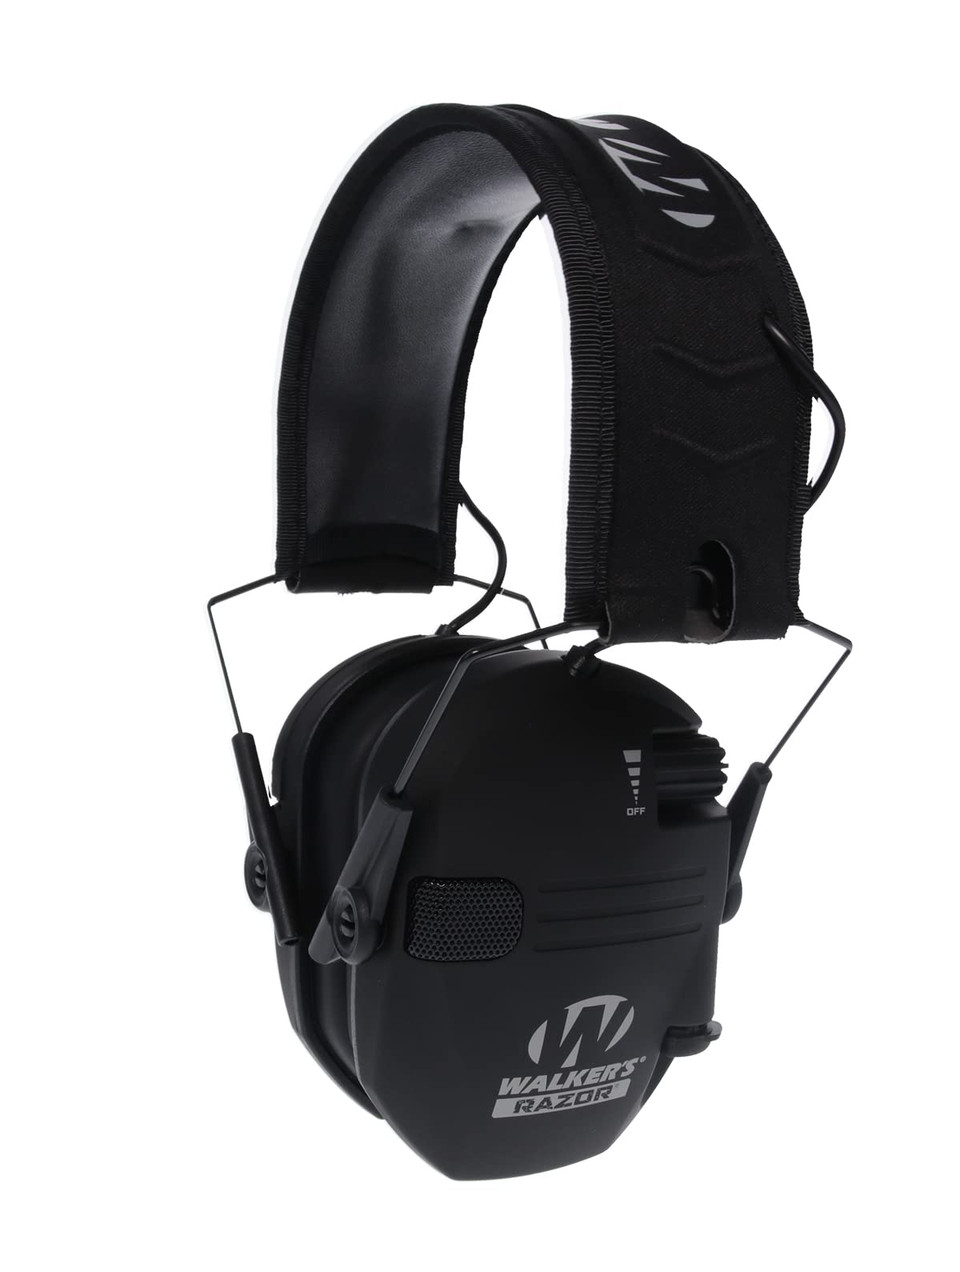 Are Walkers Safety Razor Slim Electronic Ear Muffs Worth Buying?